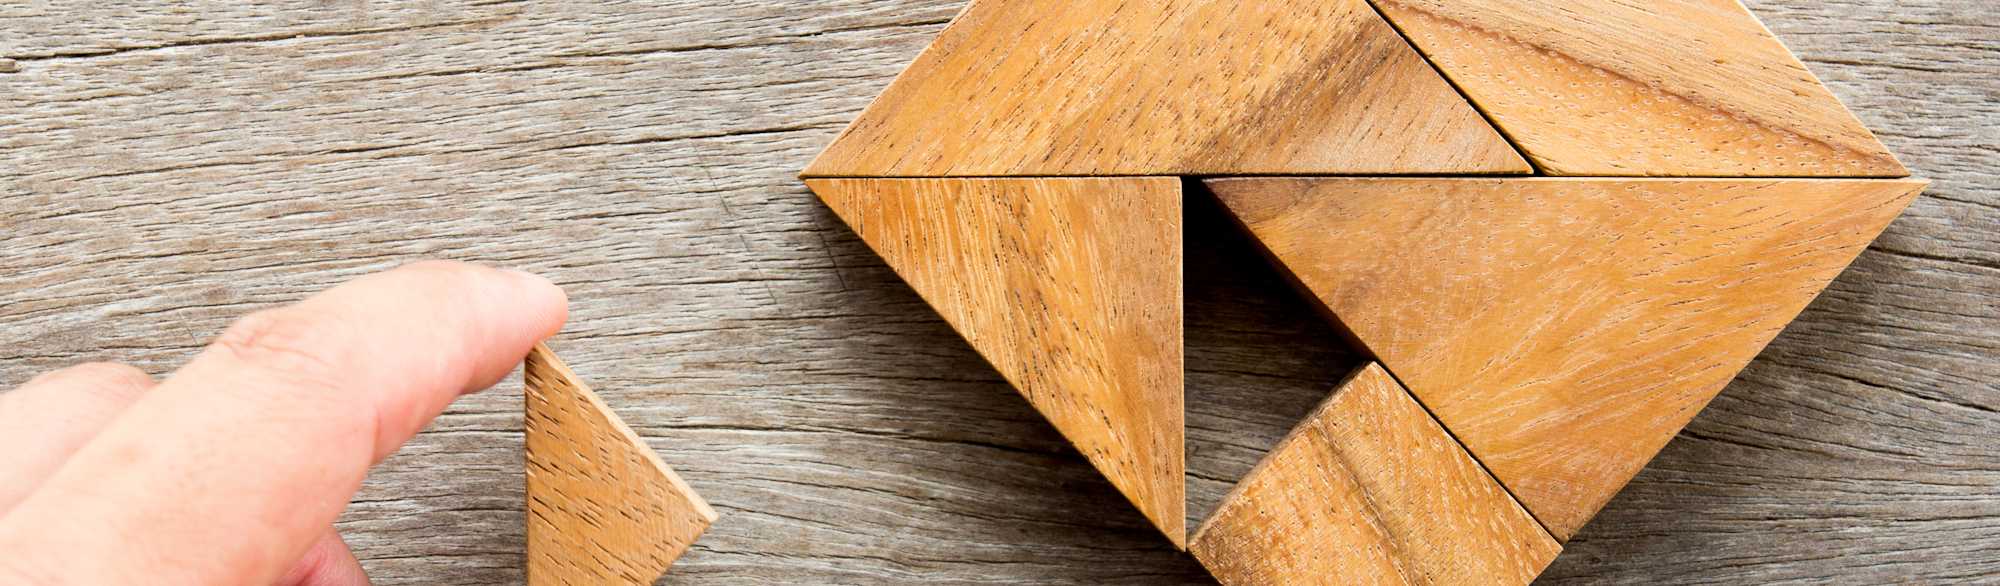 Man held piece of tangram puzzle to fulfill the heart shape